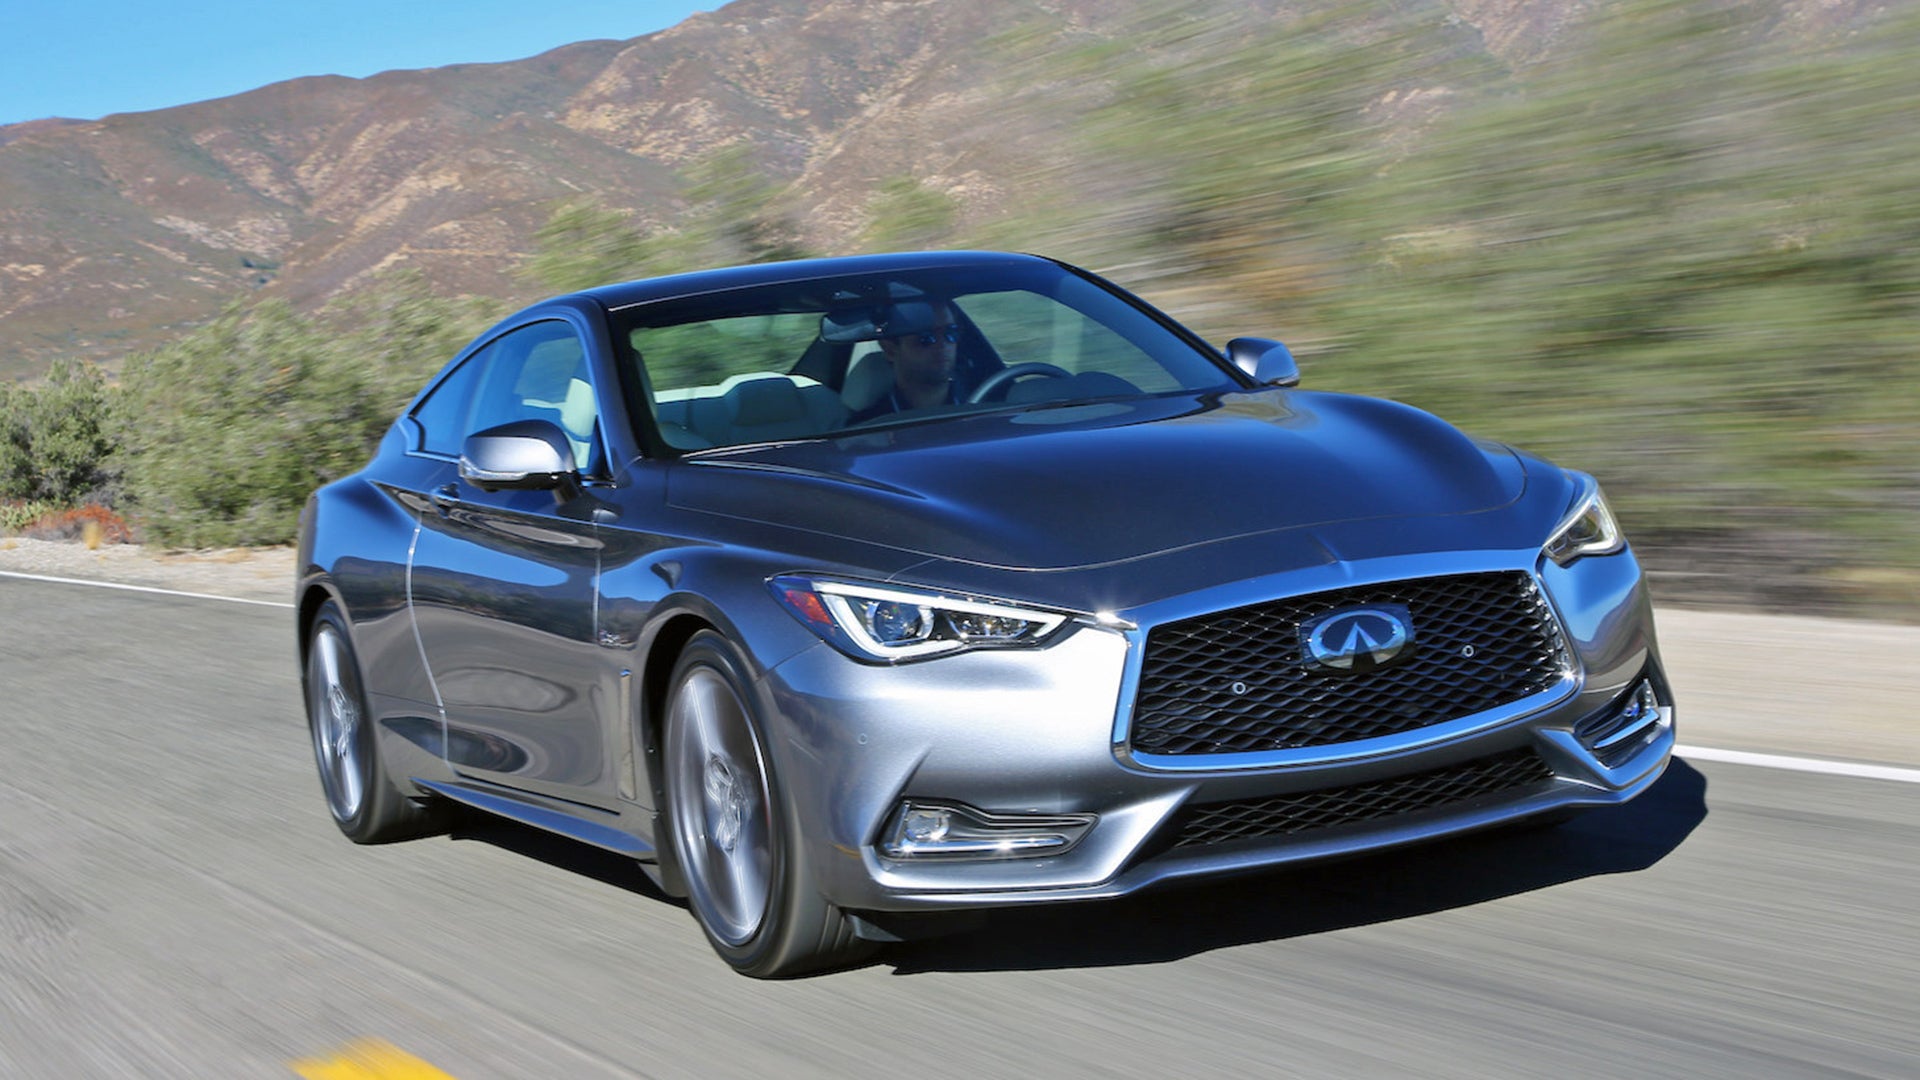 https://www.thedrive.com/content/2019/03/infiniti-q60-face.jpg?quality=85